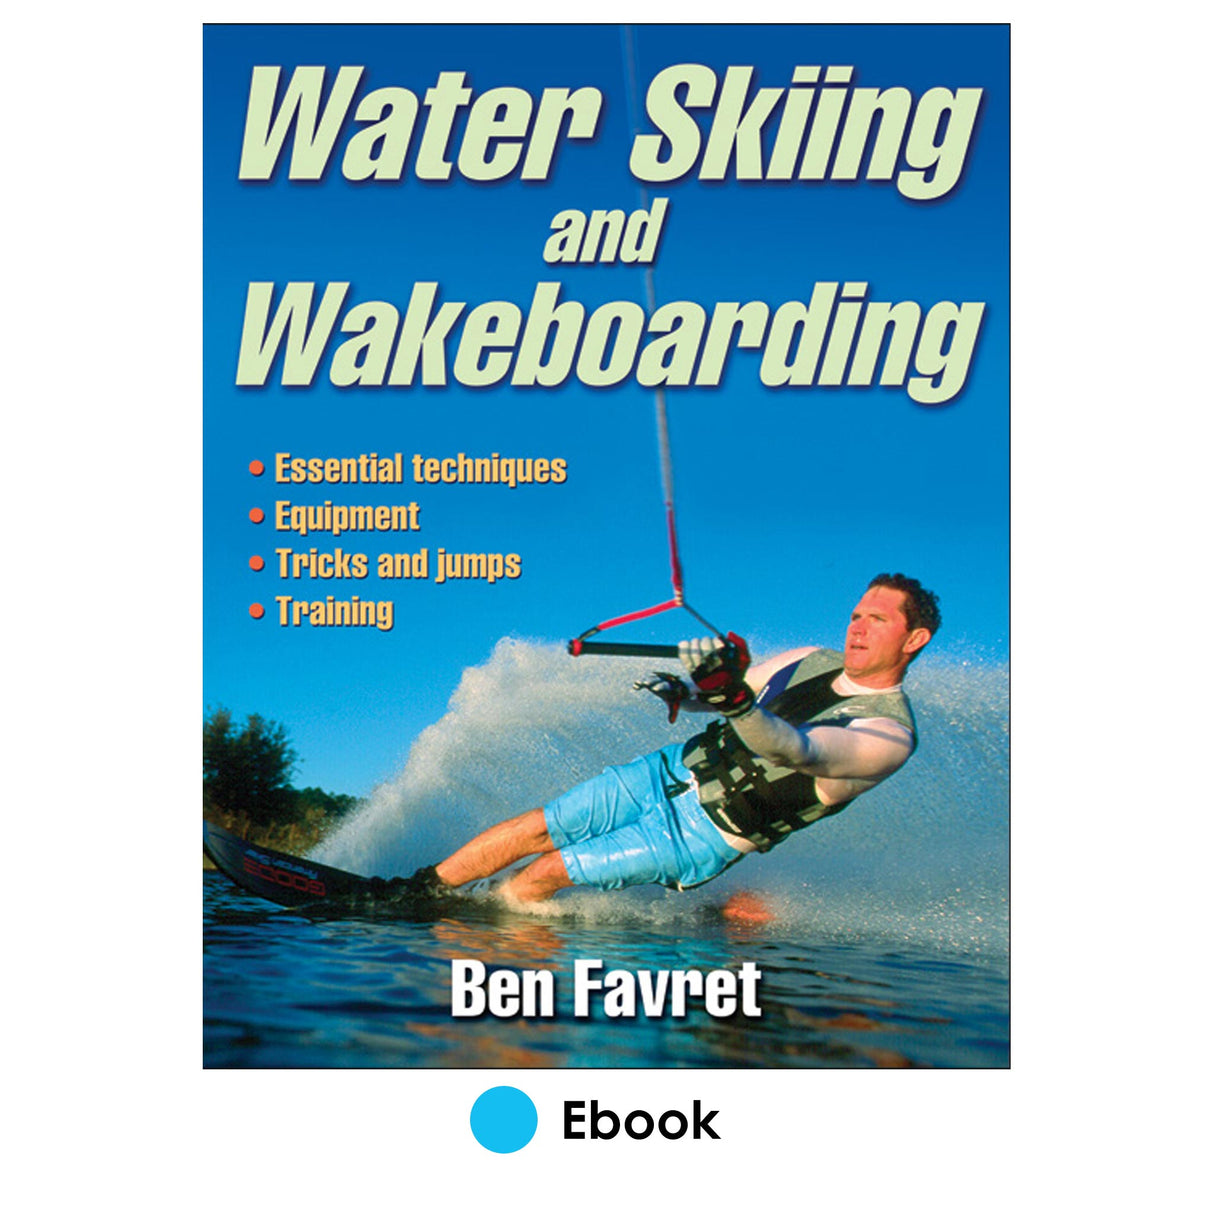 Water Skiing and Wakeboarding PDF